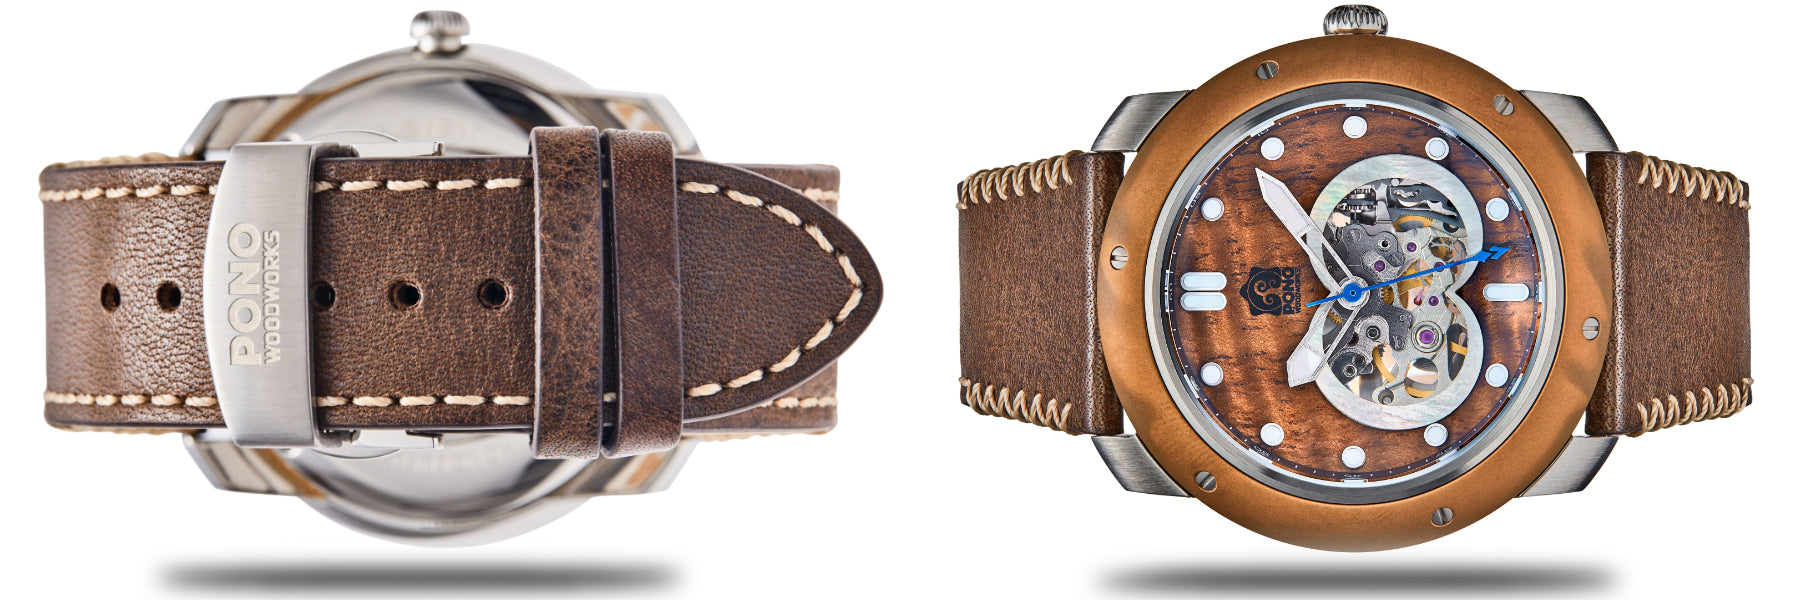 front and back view of watch horizontally oriented hovering over shadow